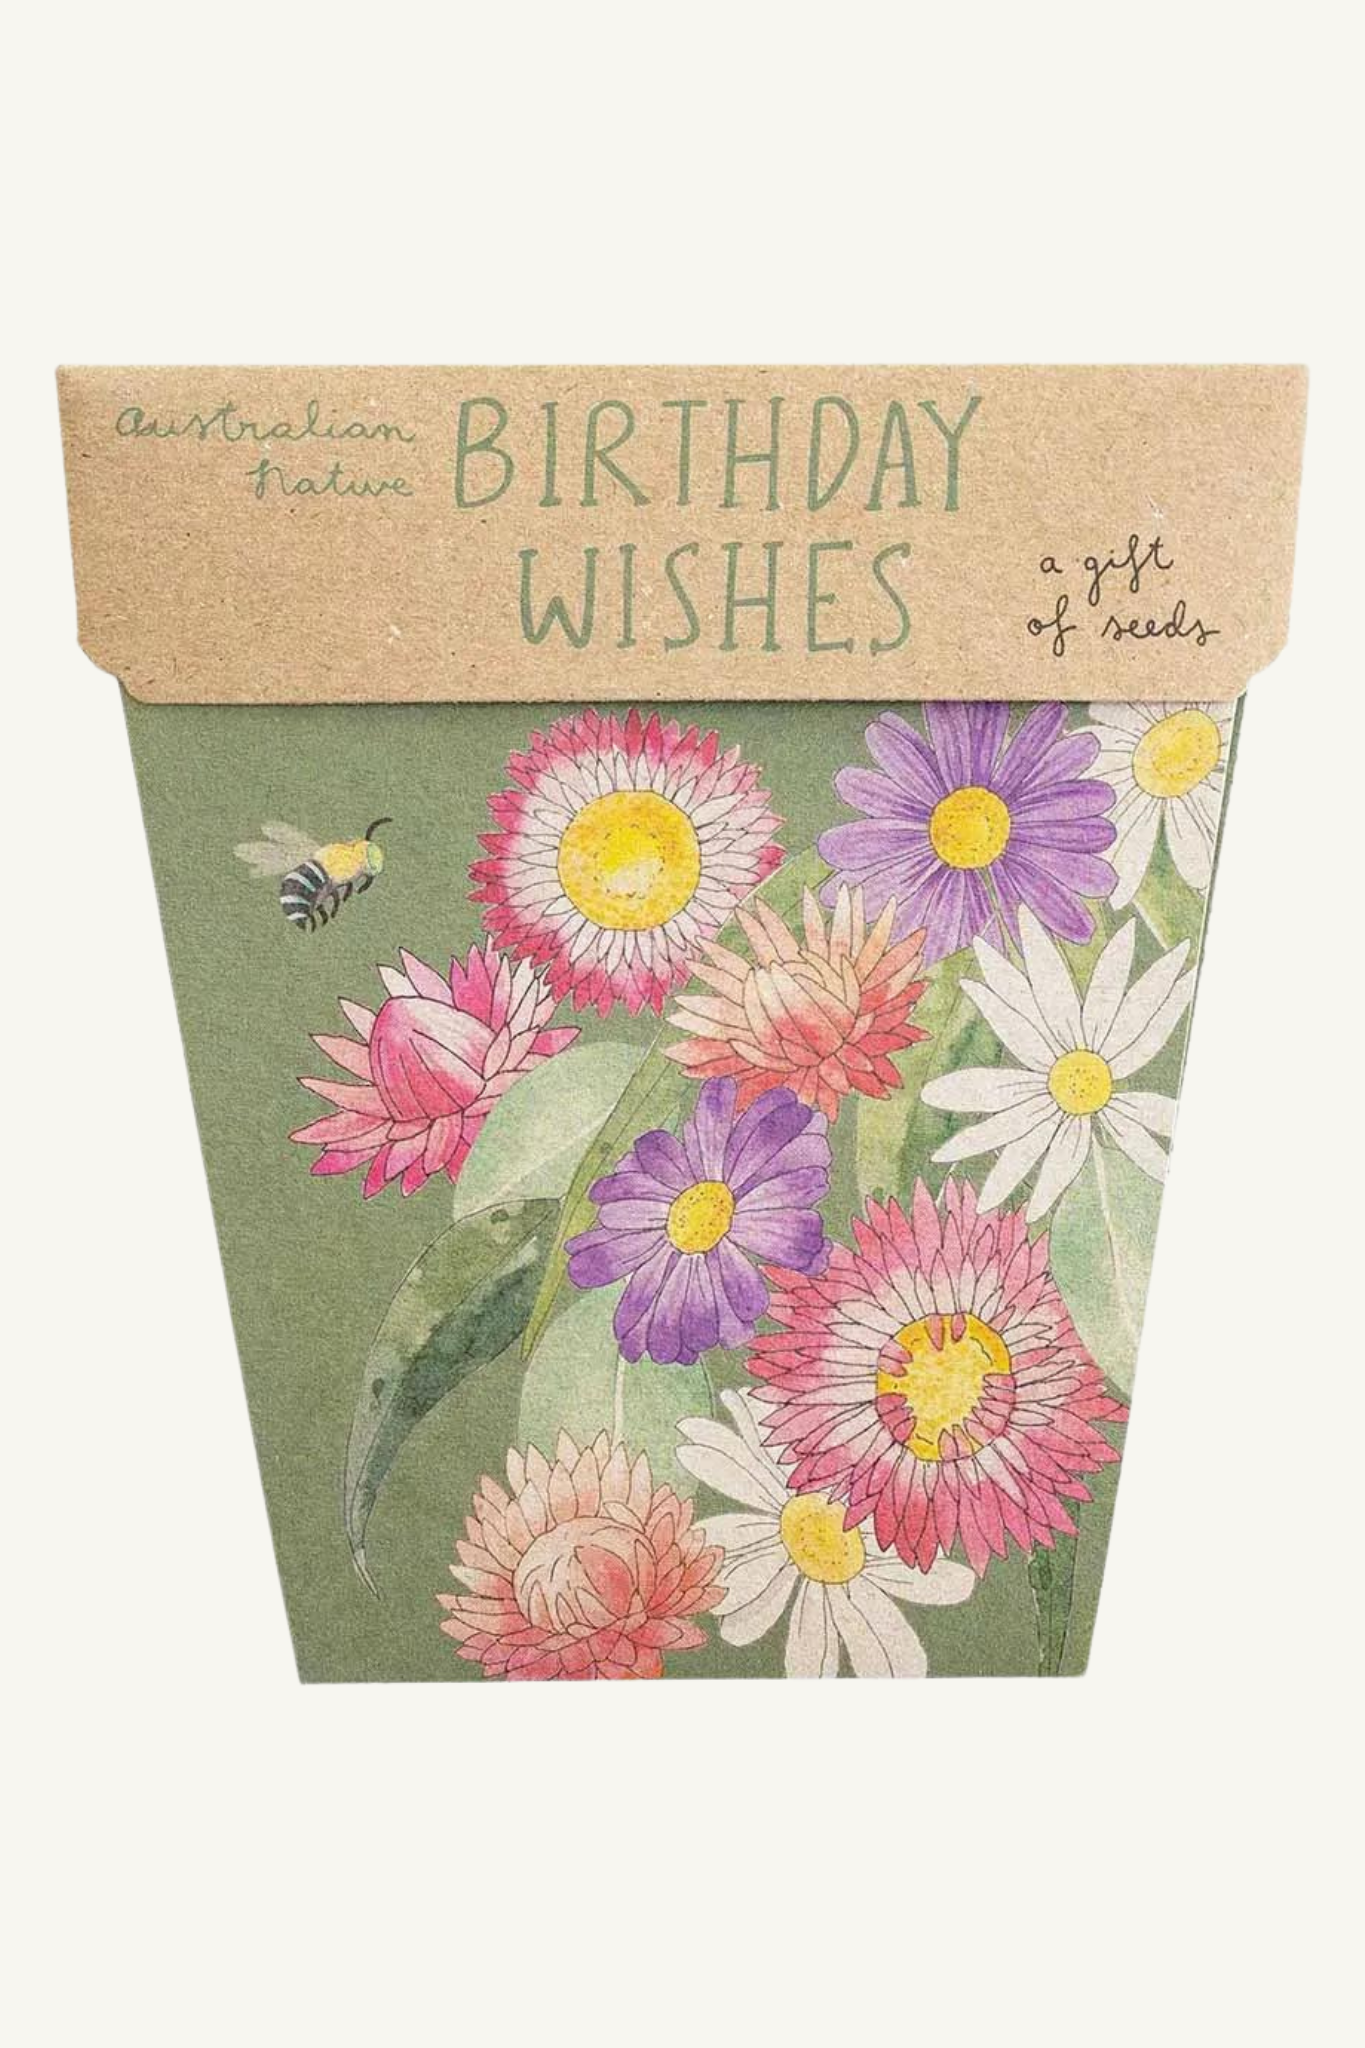 Birthday Wishes Gift of Seeds